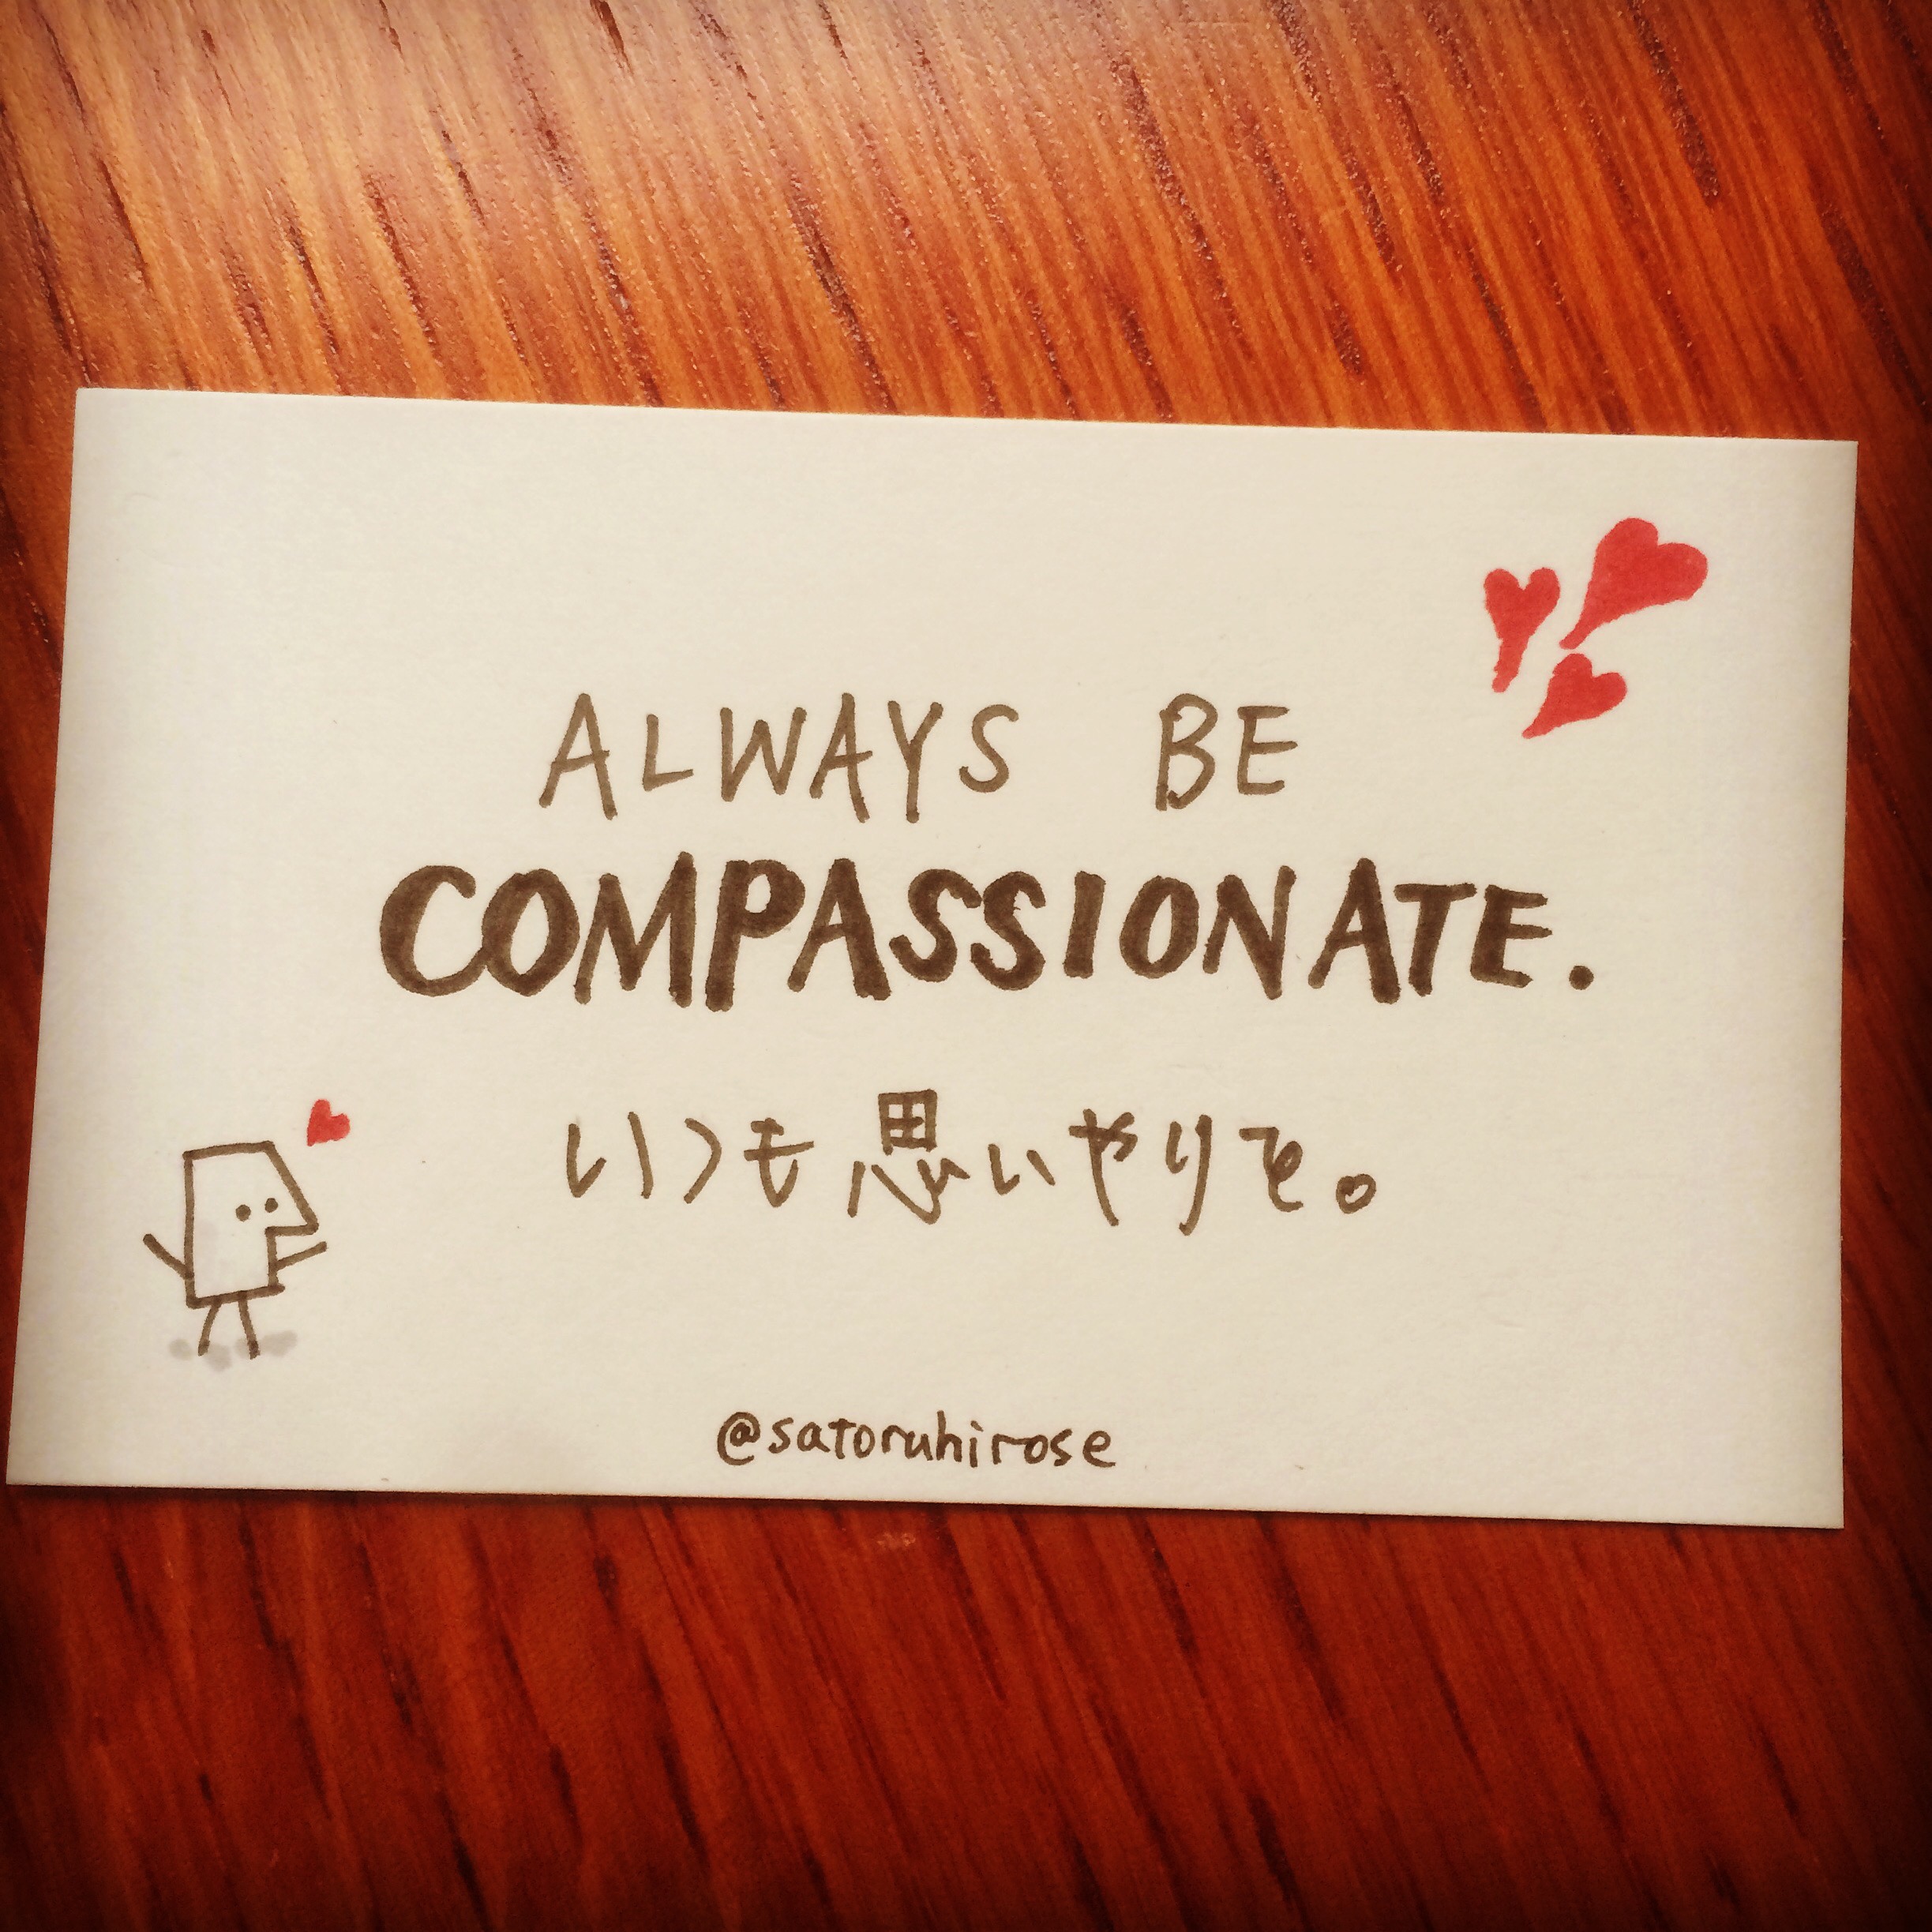 Always be compassionate.